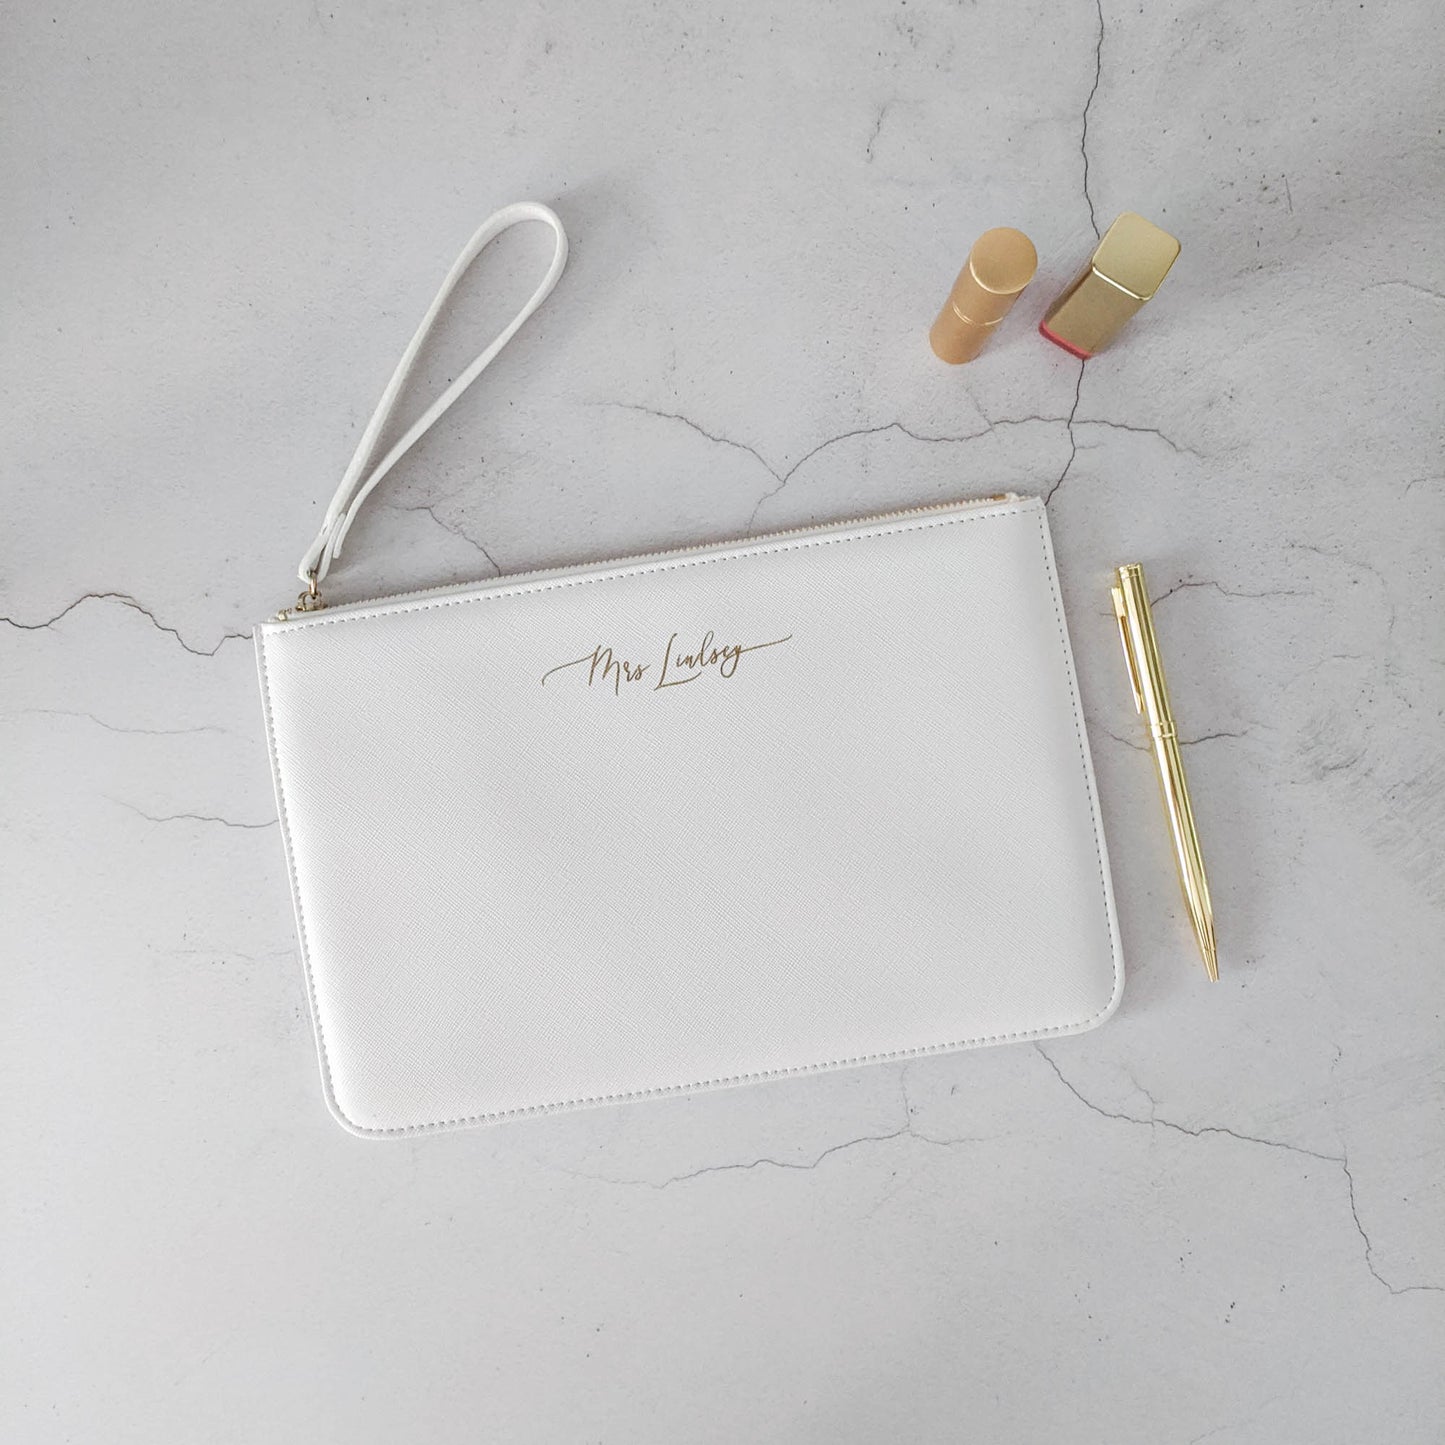 Personalised Accessory Clutch - Saffiano Leather Look